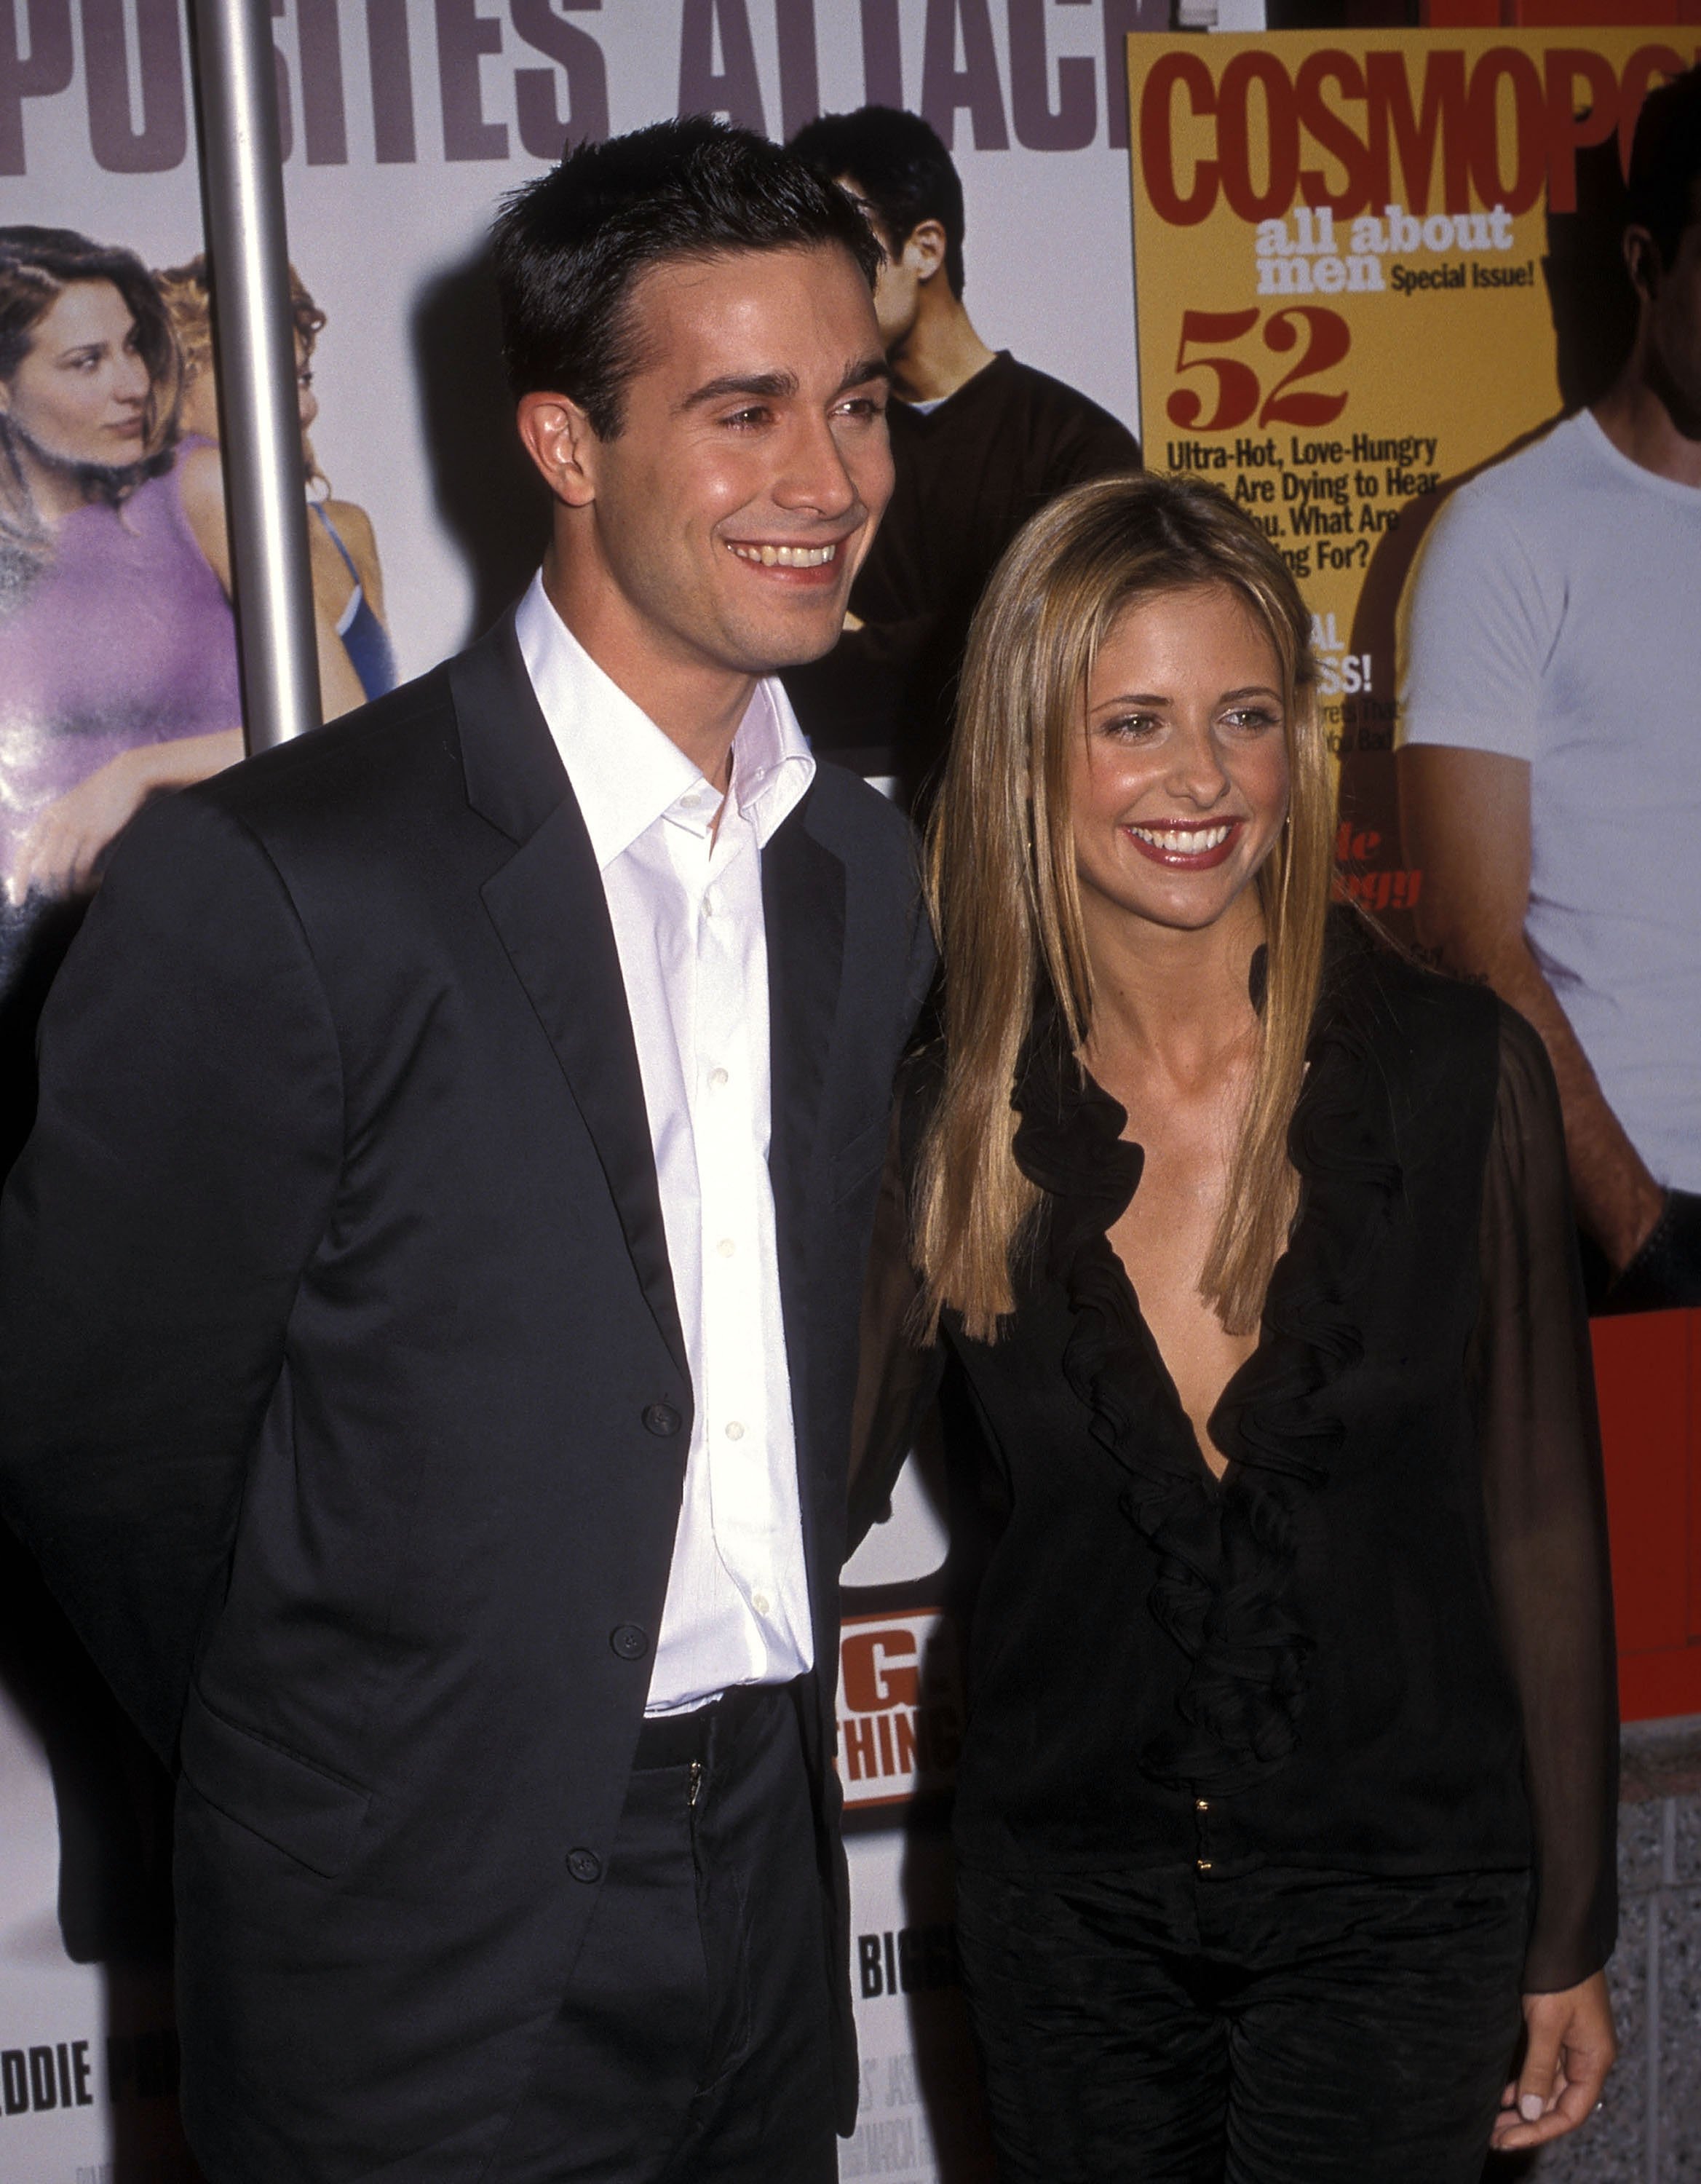 Freddie Prinze Jr. and Sarah Michelle Gellar at the New York premiere of "Boys and Girls" on June 13, 2000 | Source: Getty Images